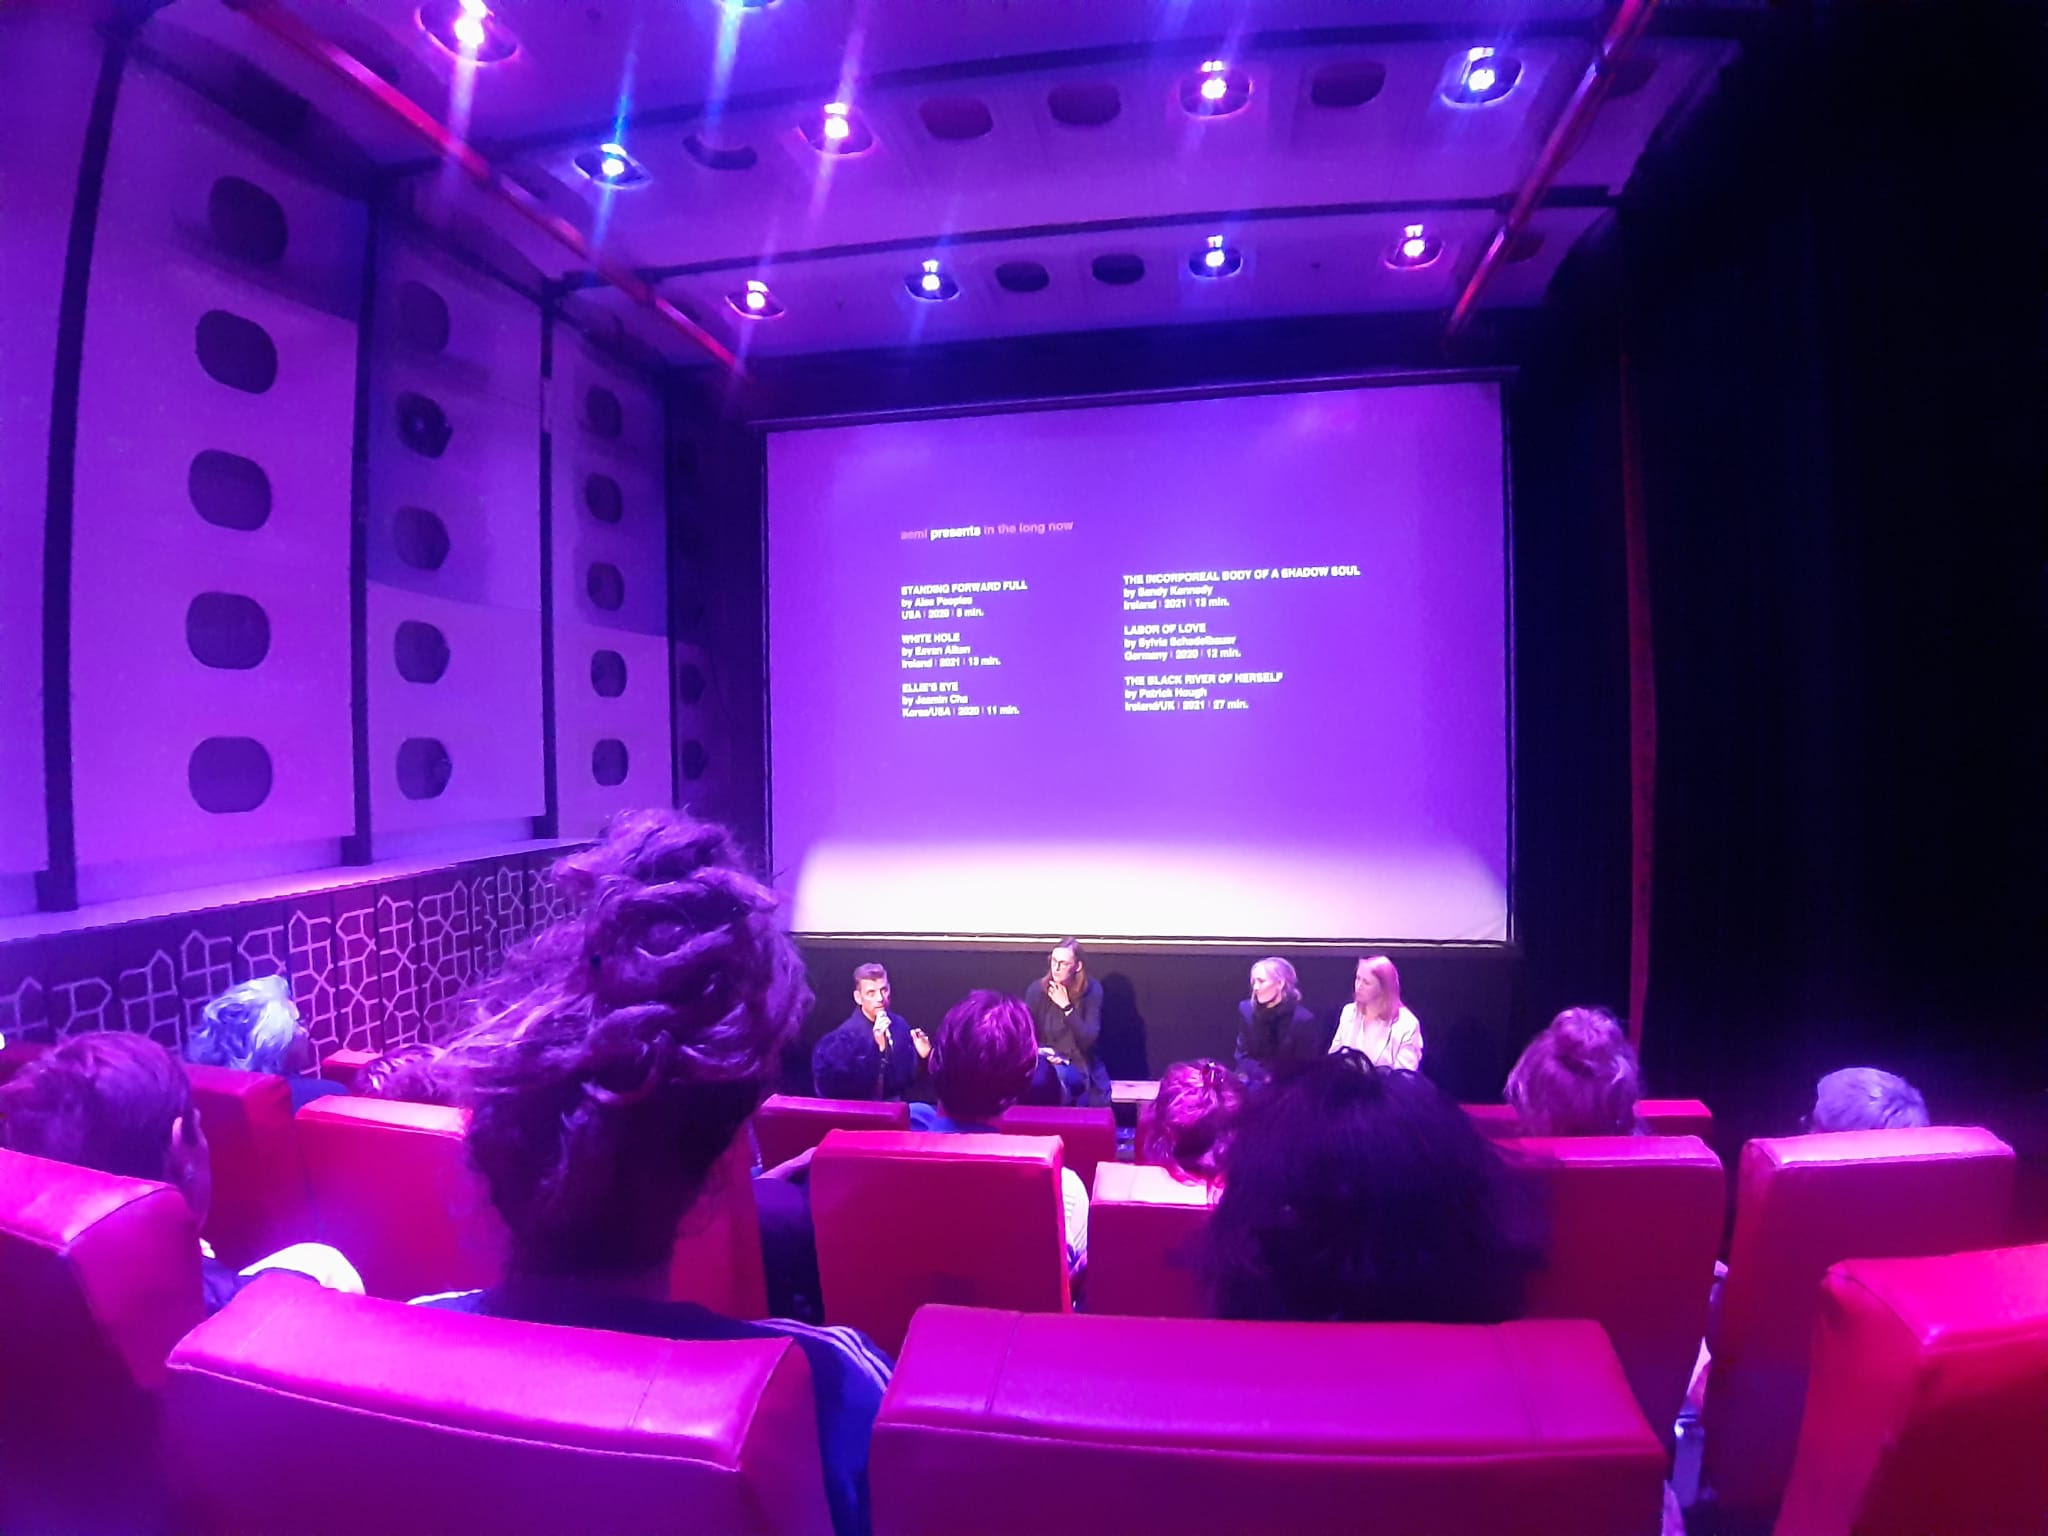 Tim Leyendekker, Eavan Aiken, Sandy Kennedy and Alice Butler all take part in a Q&A discussion inside a busy alternative cinema space lit with purple lighting. The walls are made from the windows of airplanes, and the red seats the audience sit in are also repurposed from an airplane